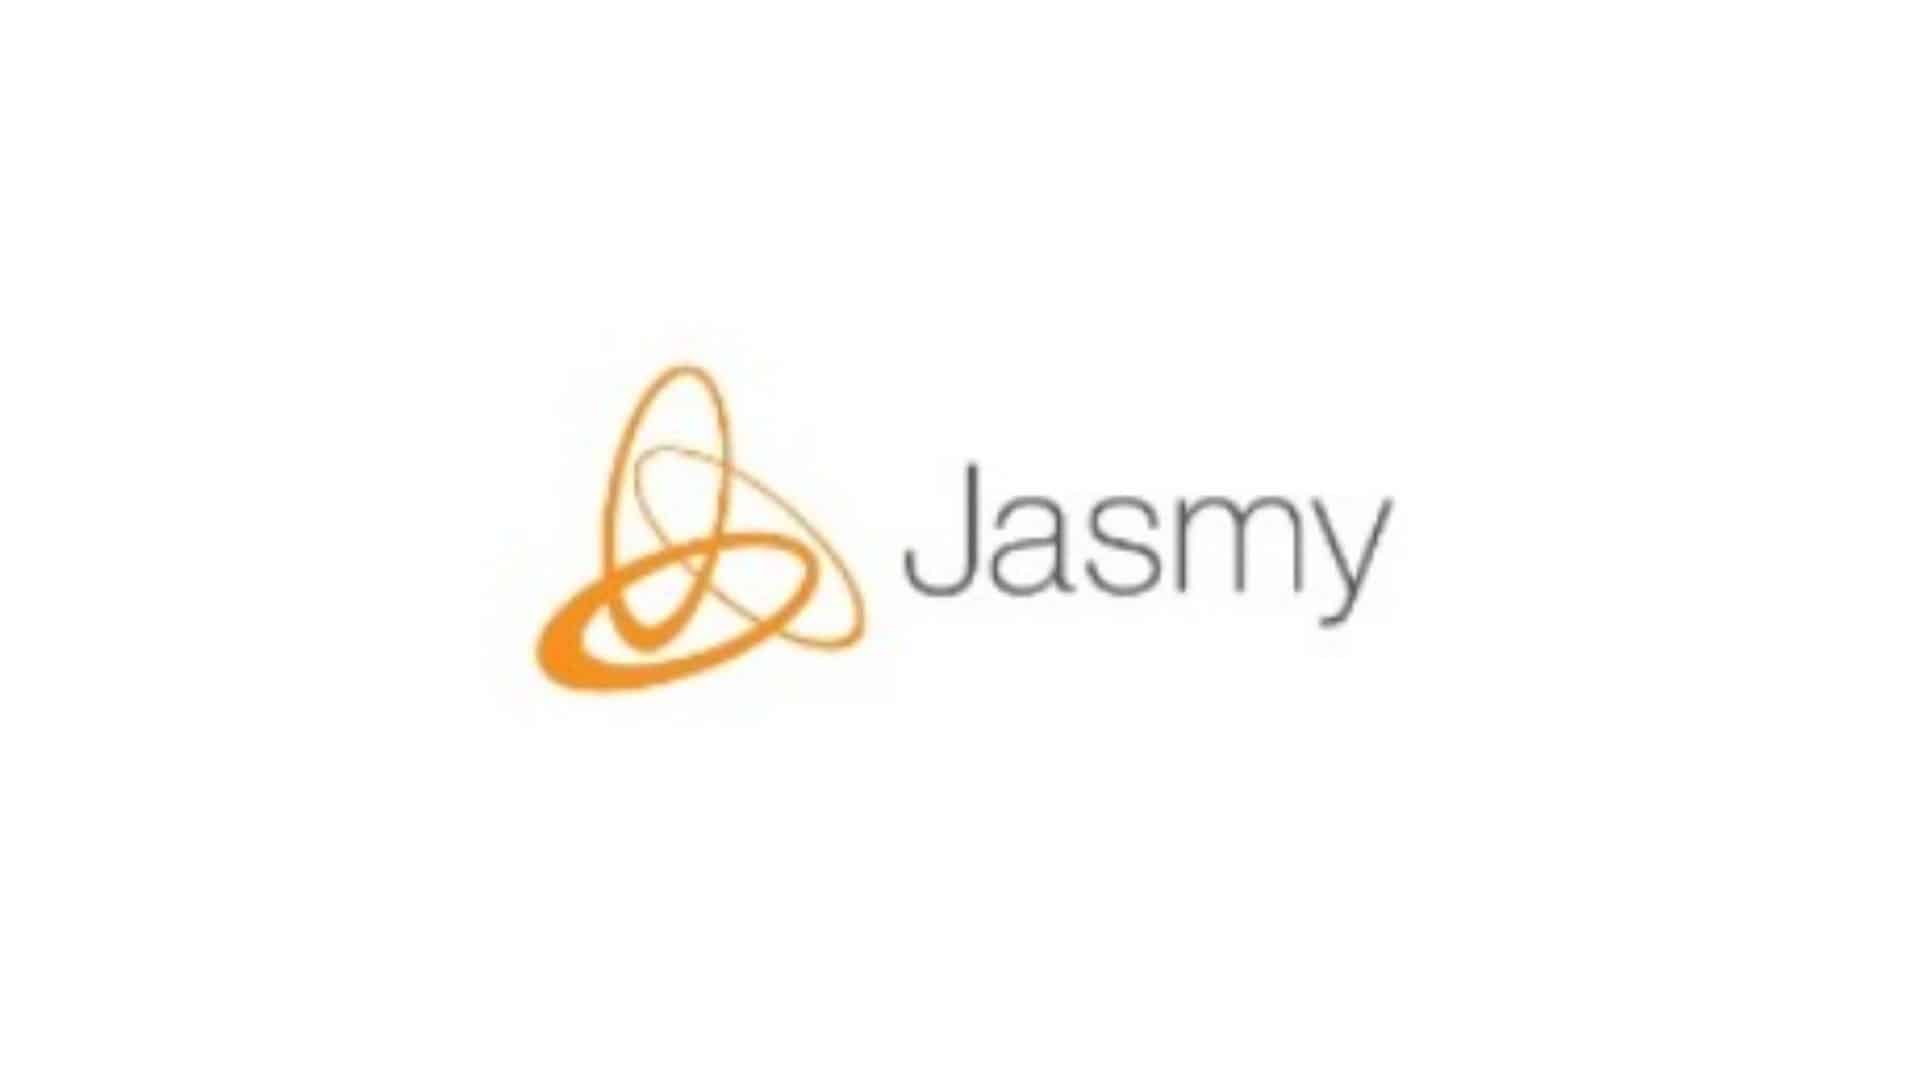 Jasmy Coin Price Prediction: Why Prices are Dropping